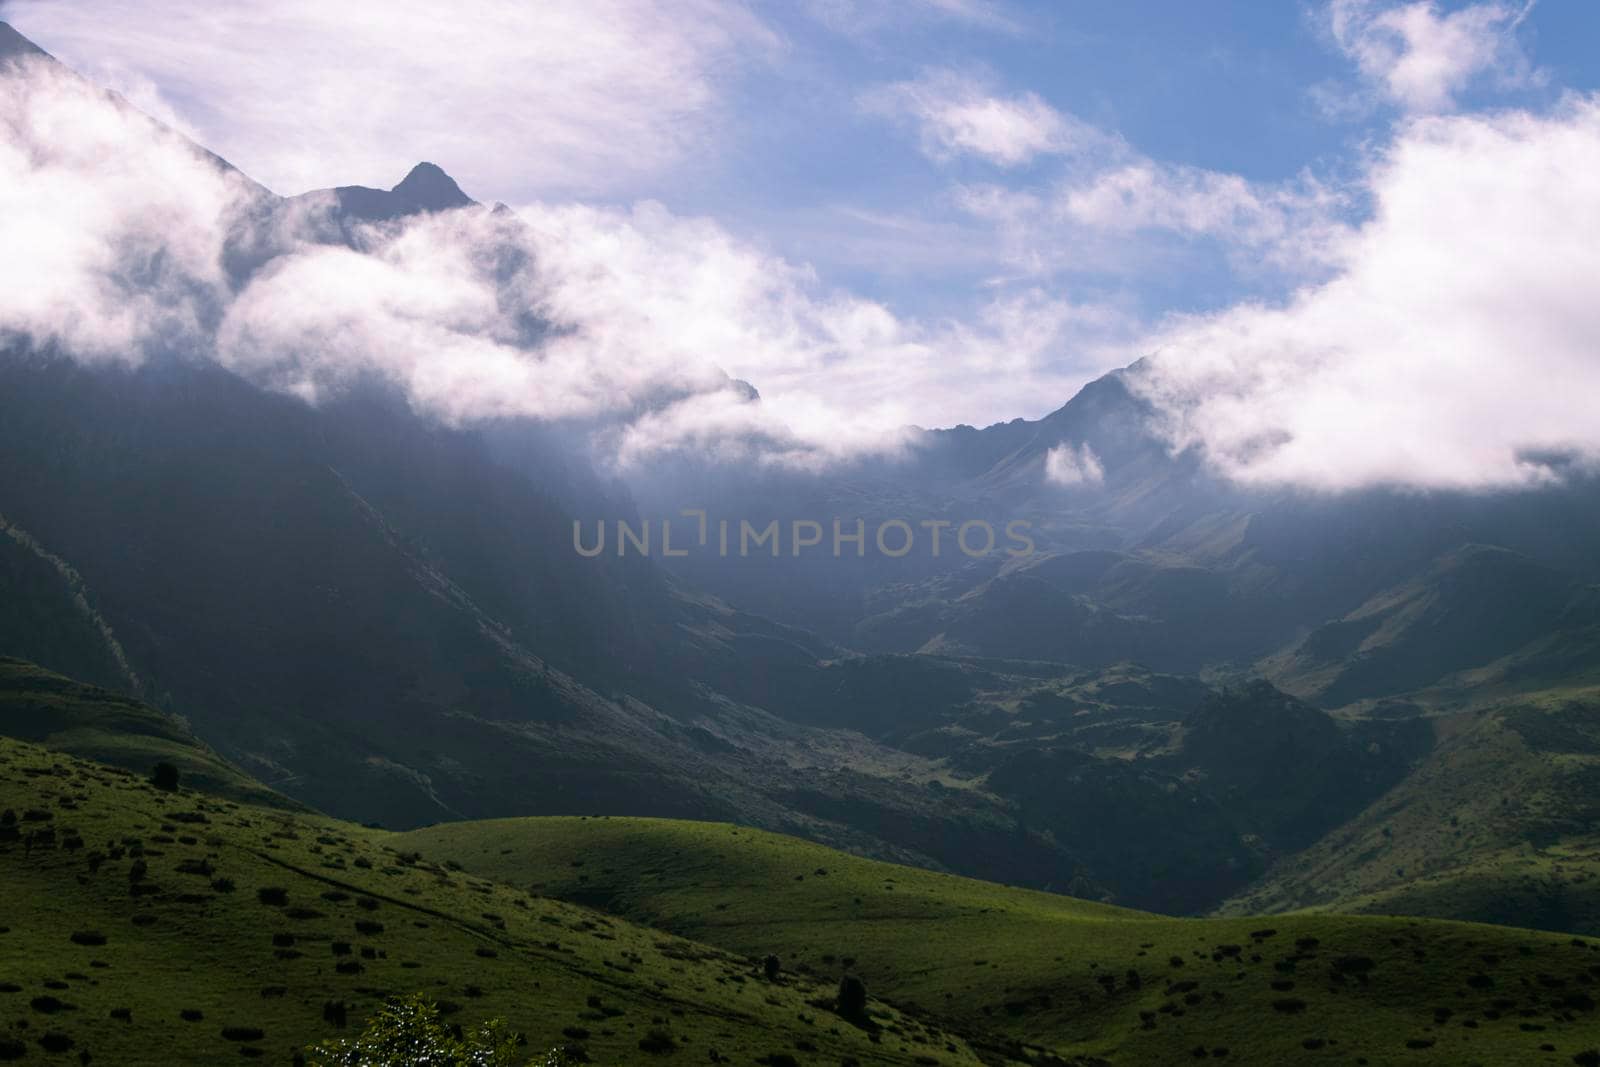 Absolutely stunning view of hills and mountains in the French Pyrenees by StefanMal